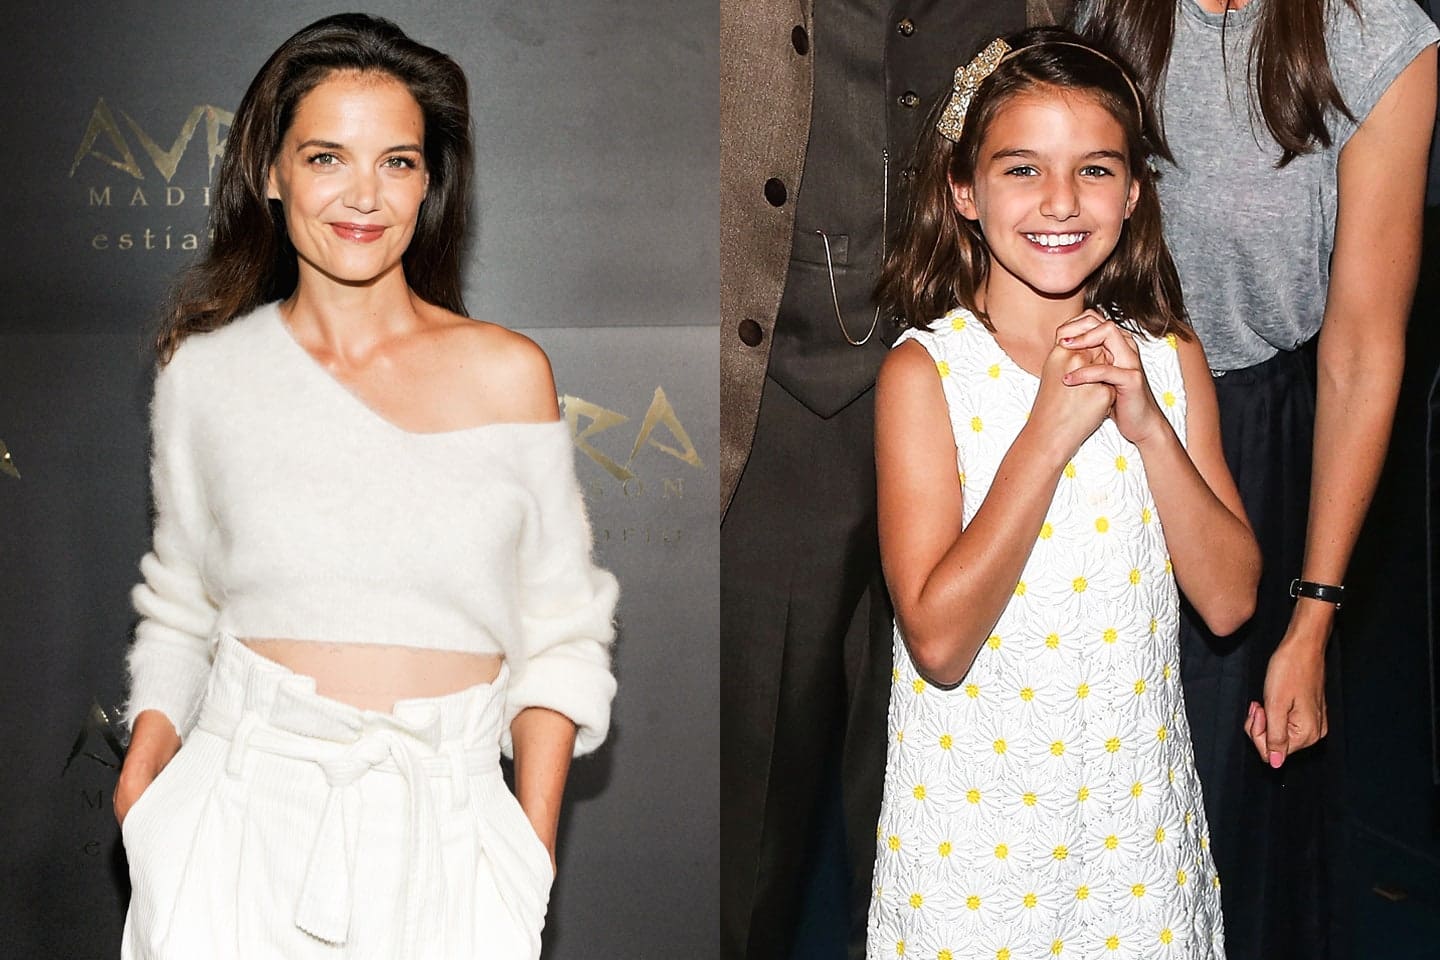 ”suri-cruise-looks-like-her-mom-katie-holmes-spitting-image-in-new-pics”